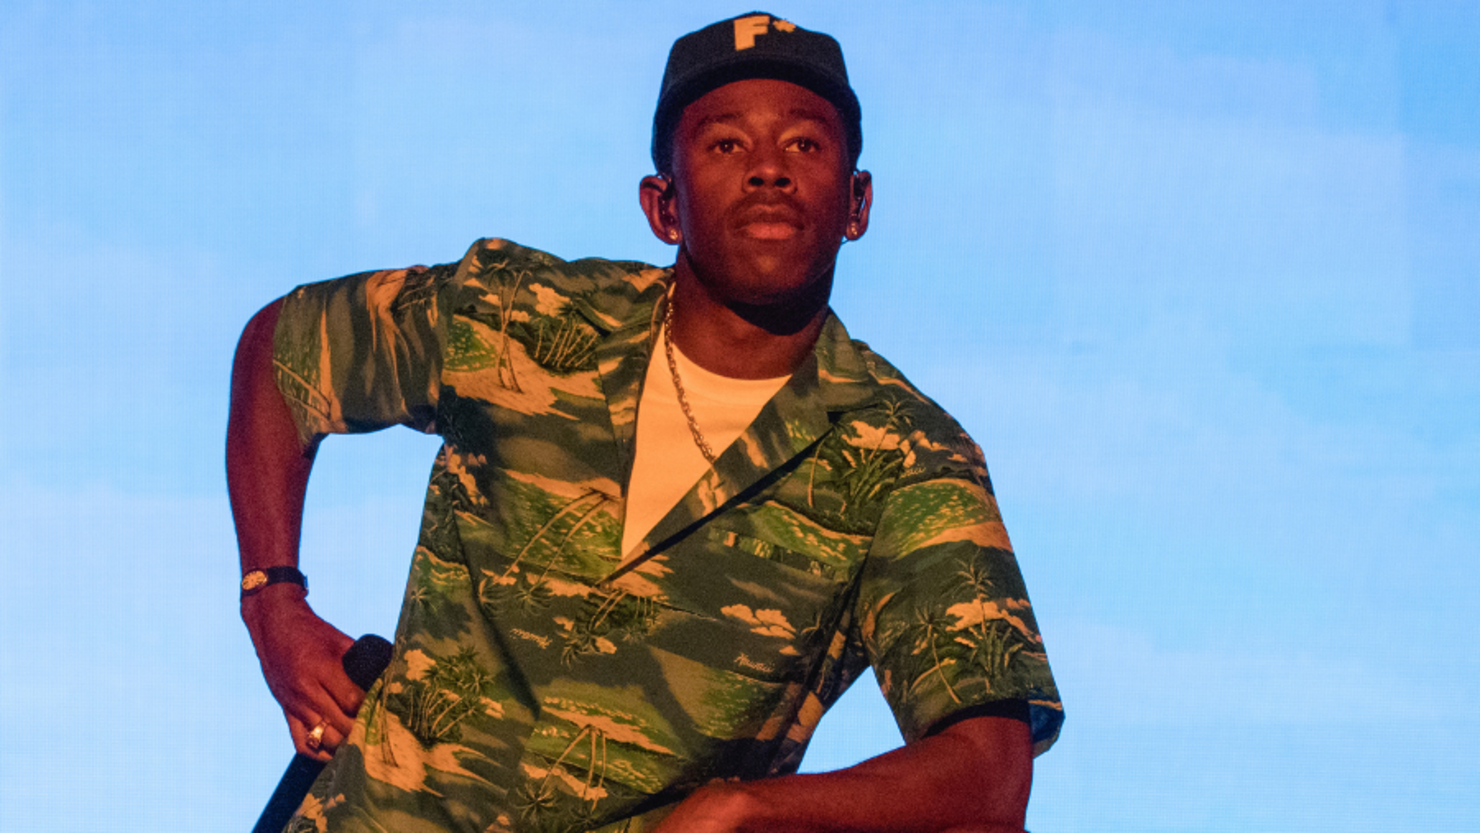 Tyler, The Creator And His Army Of Clones Burned Down The Grammys, News